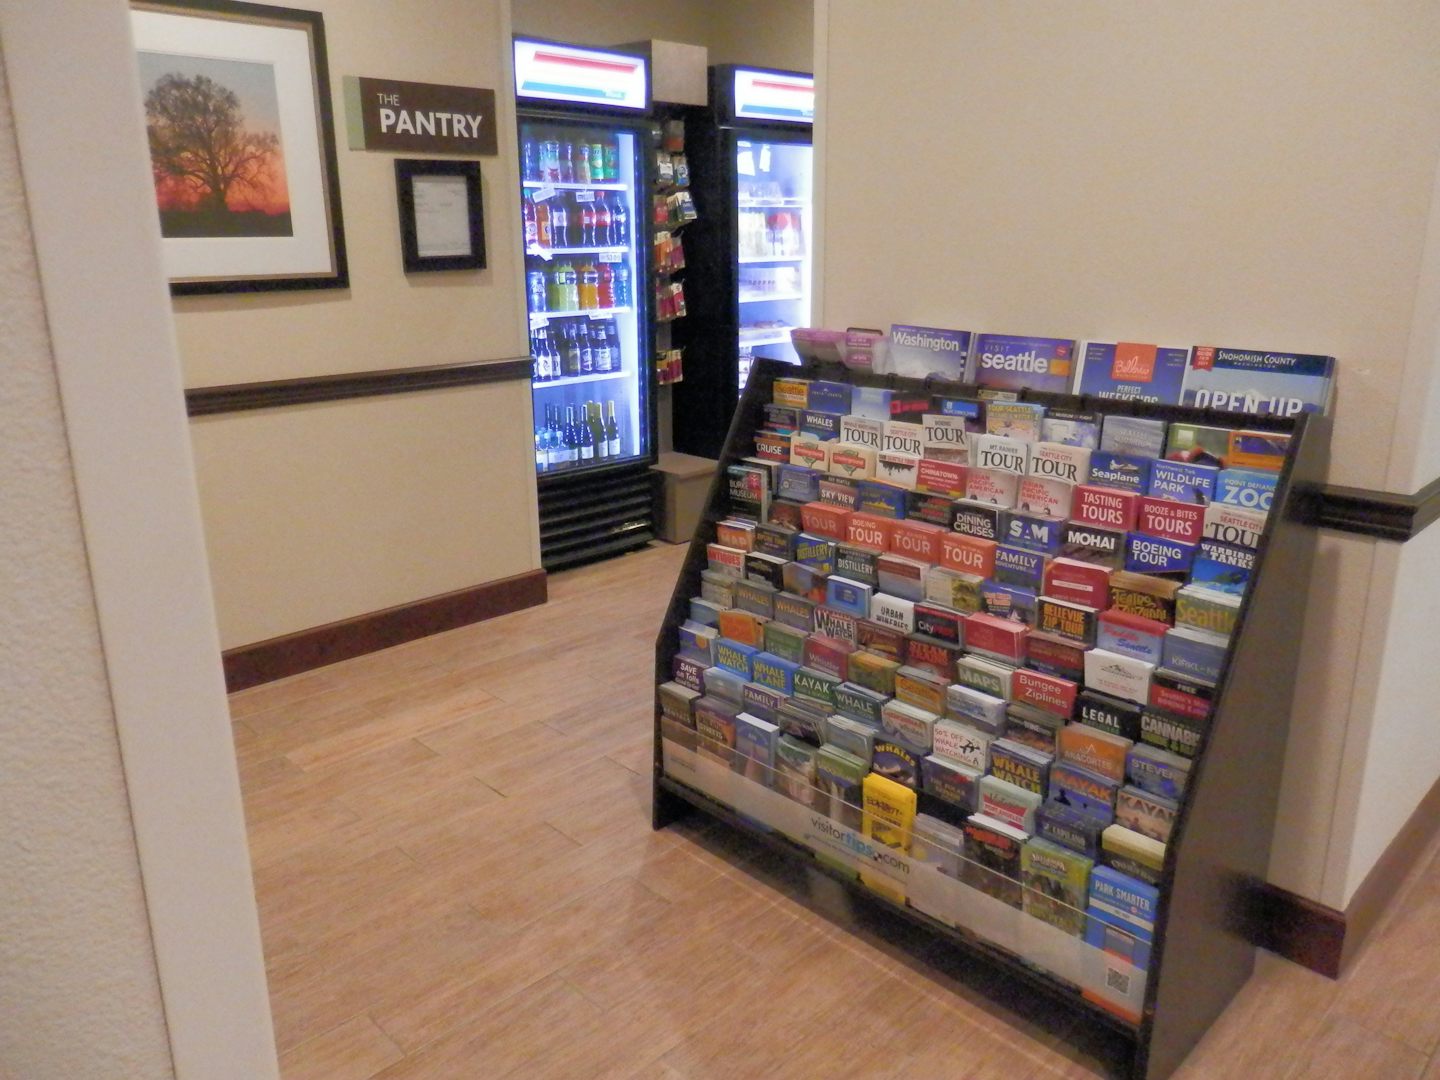 Staybridge Suites snack store and pamphlets